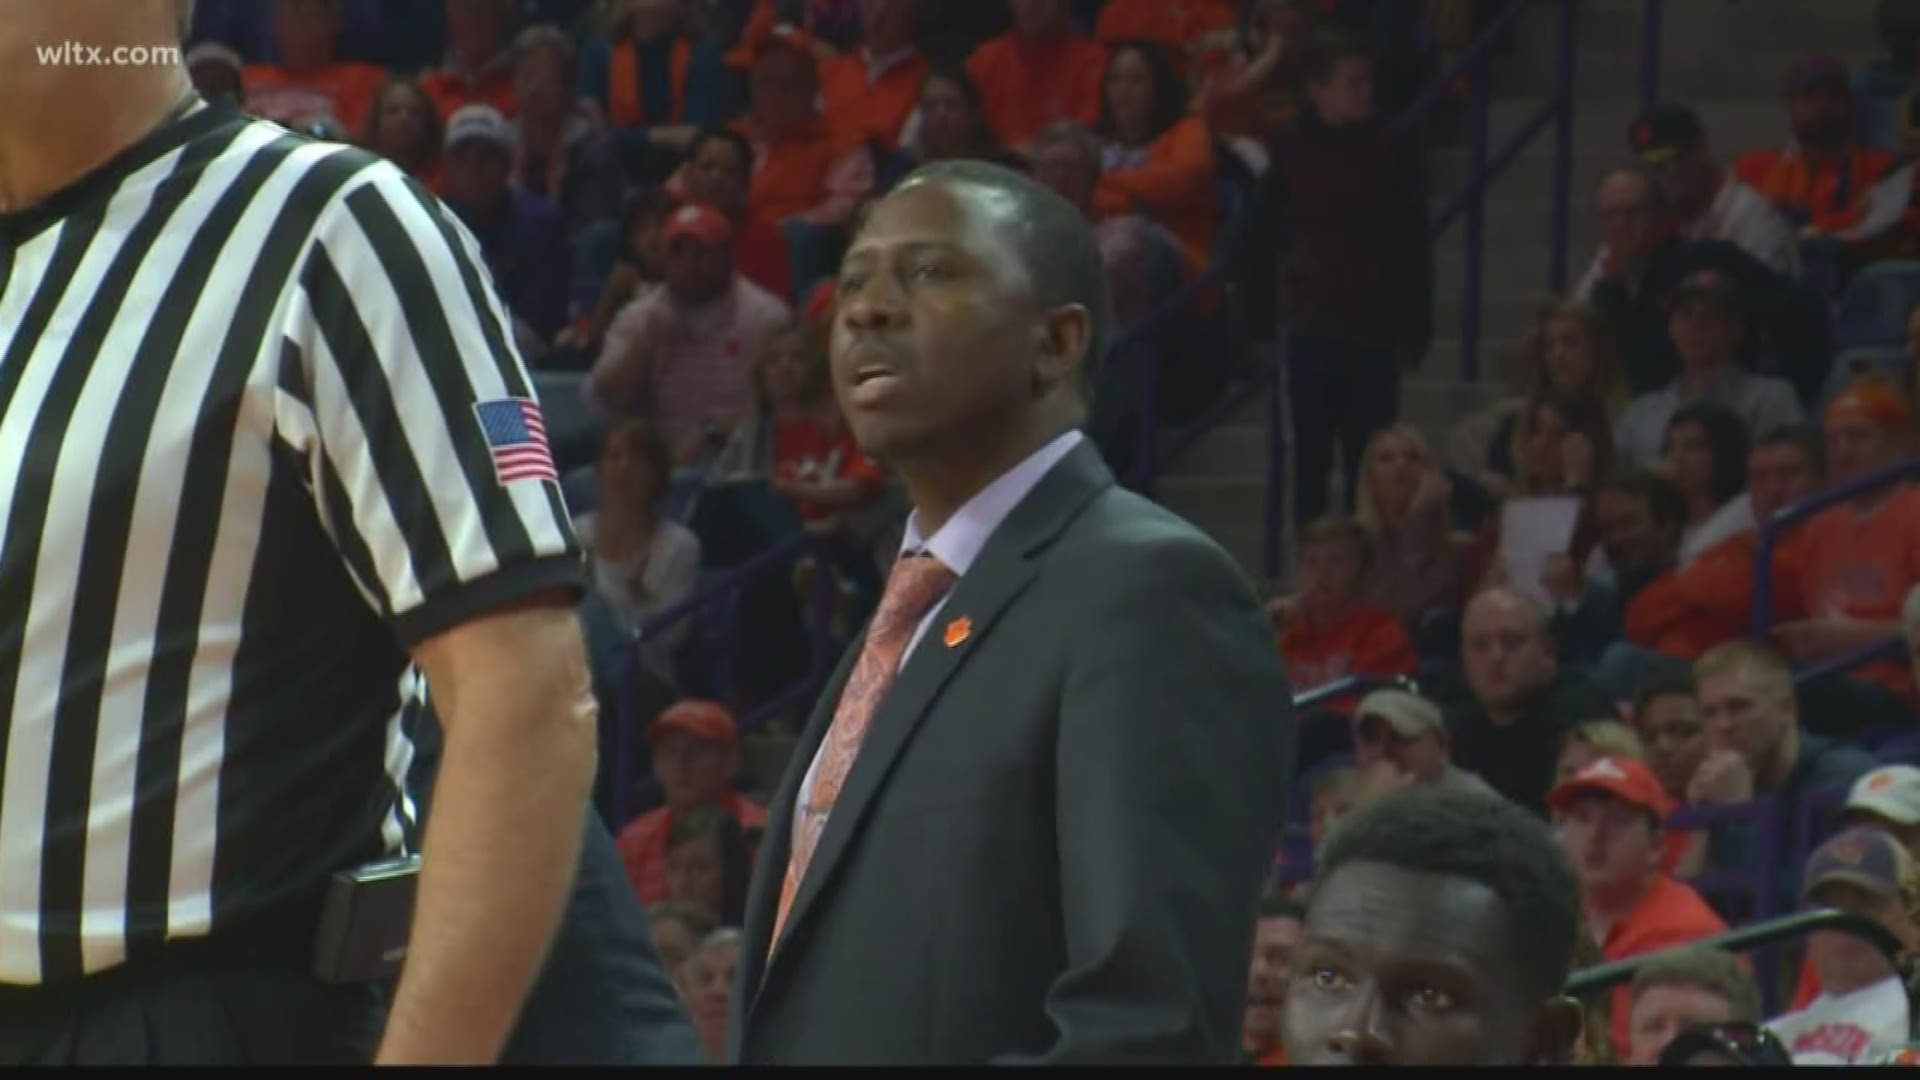 Steve Smith, an assistant basketball coach at Clemson, did not have his contract renewed.